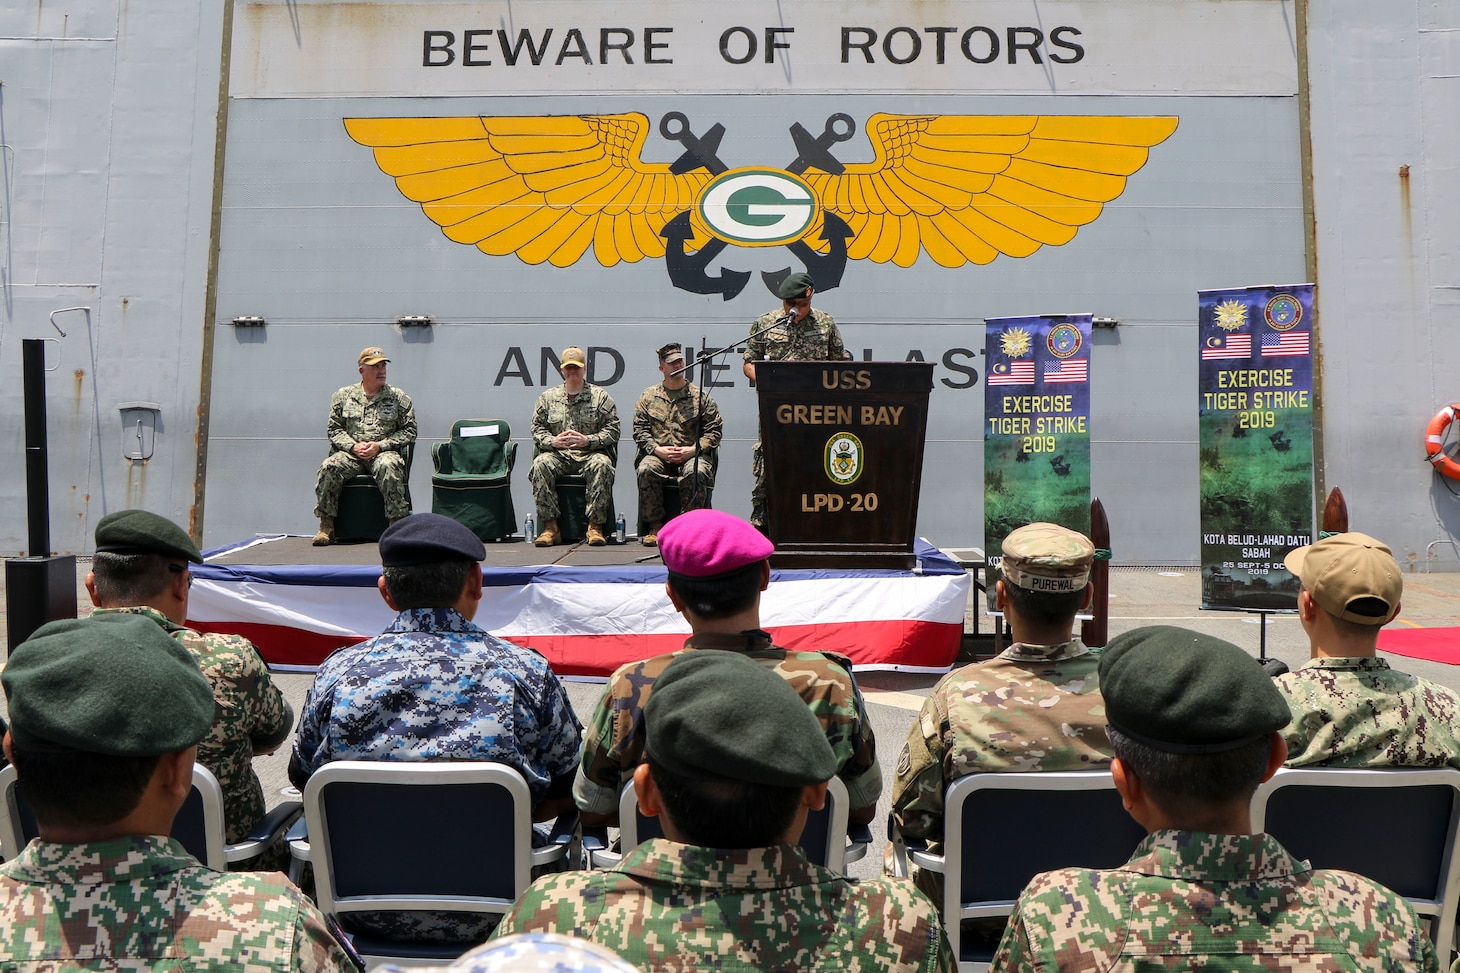 CELEBES SEA (Sept. 30, 2019) U.S. Marines with 3rd Marine Division, Sailors with the amphibious transport dock ship USS Green Bay (LPD 20) and service members with the Malaysian Armed Forces (MAF) hold an opening ceremony for exercise Tiger Strike 2019. Tiger Strike focuses on strengthening combined U.S. and Malaysian military interoperability and increasing combat readiness through amphibious operations and cultural exchanges between the MAF and the U.S. Navy, Marine Corps team.